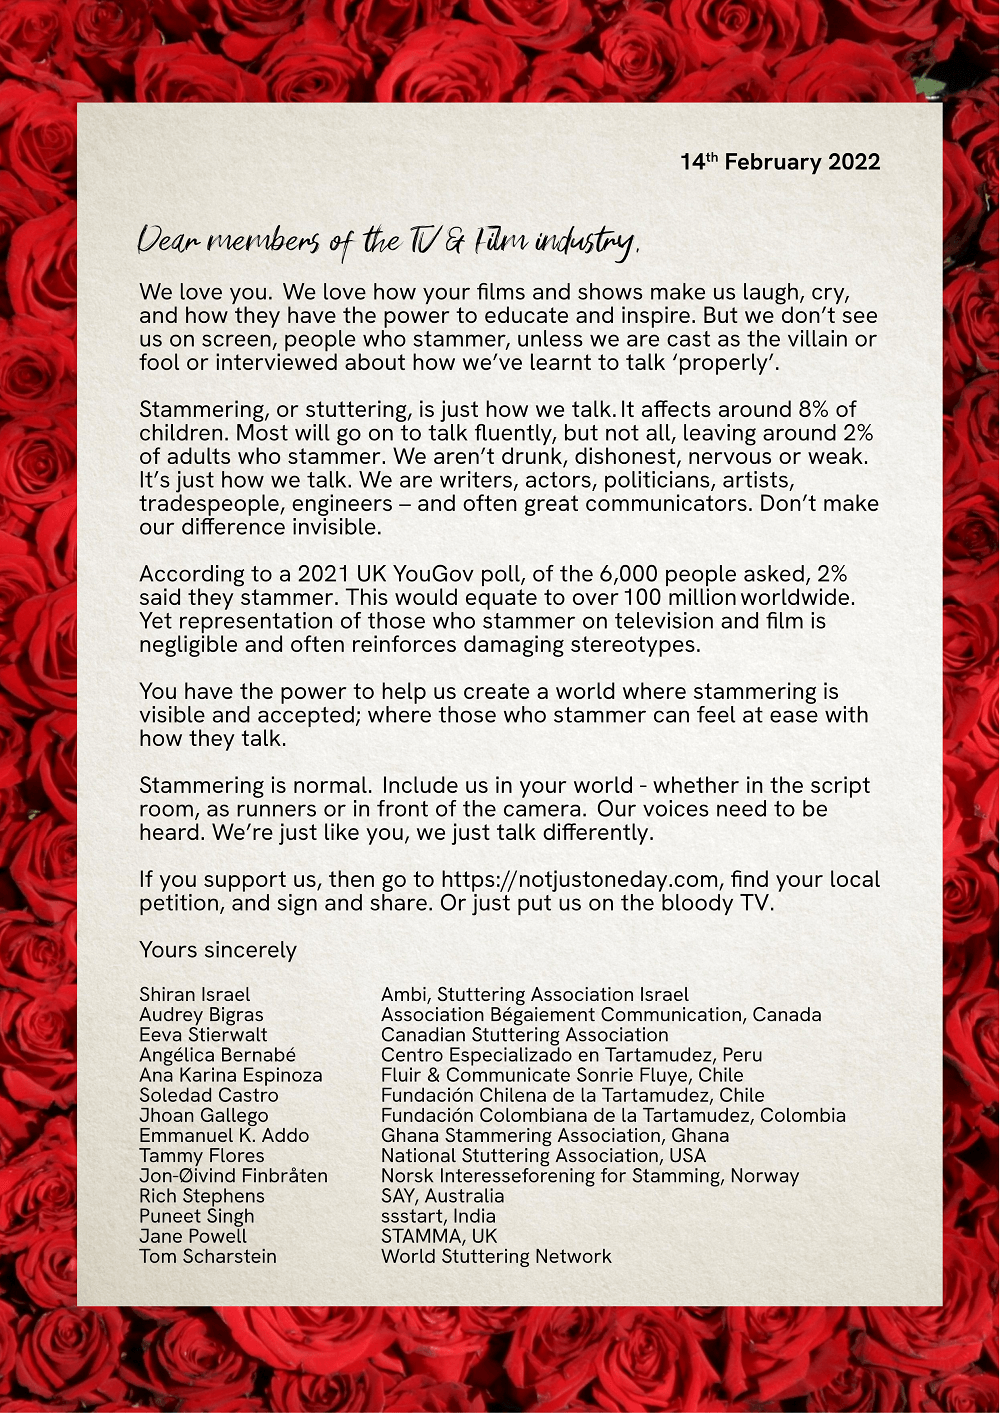 A letter against a backdrop of roses